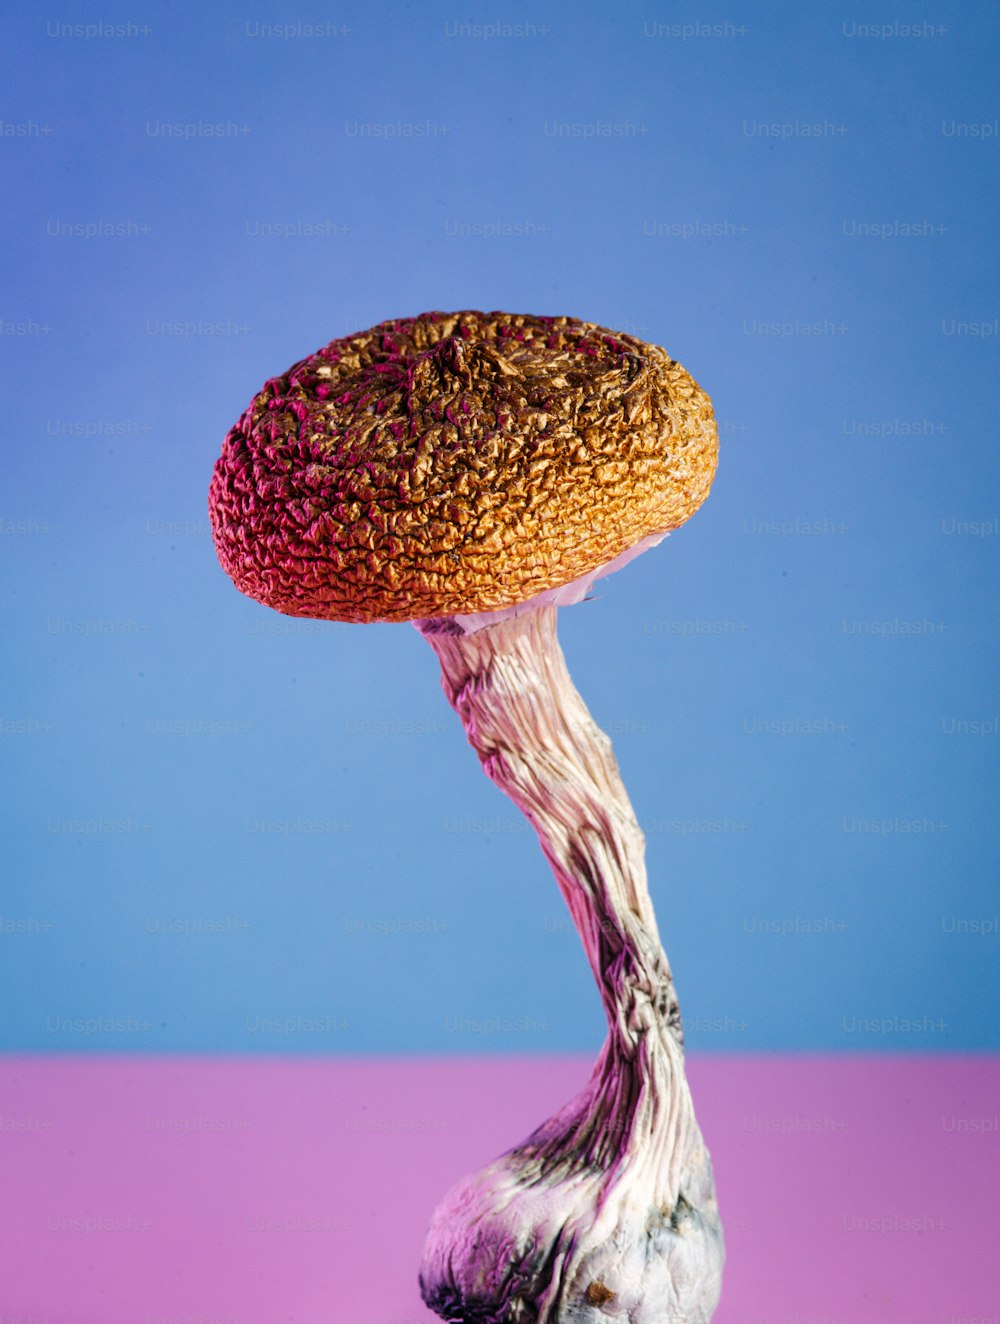 a close up of a mushroom on a pink and blue background